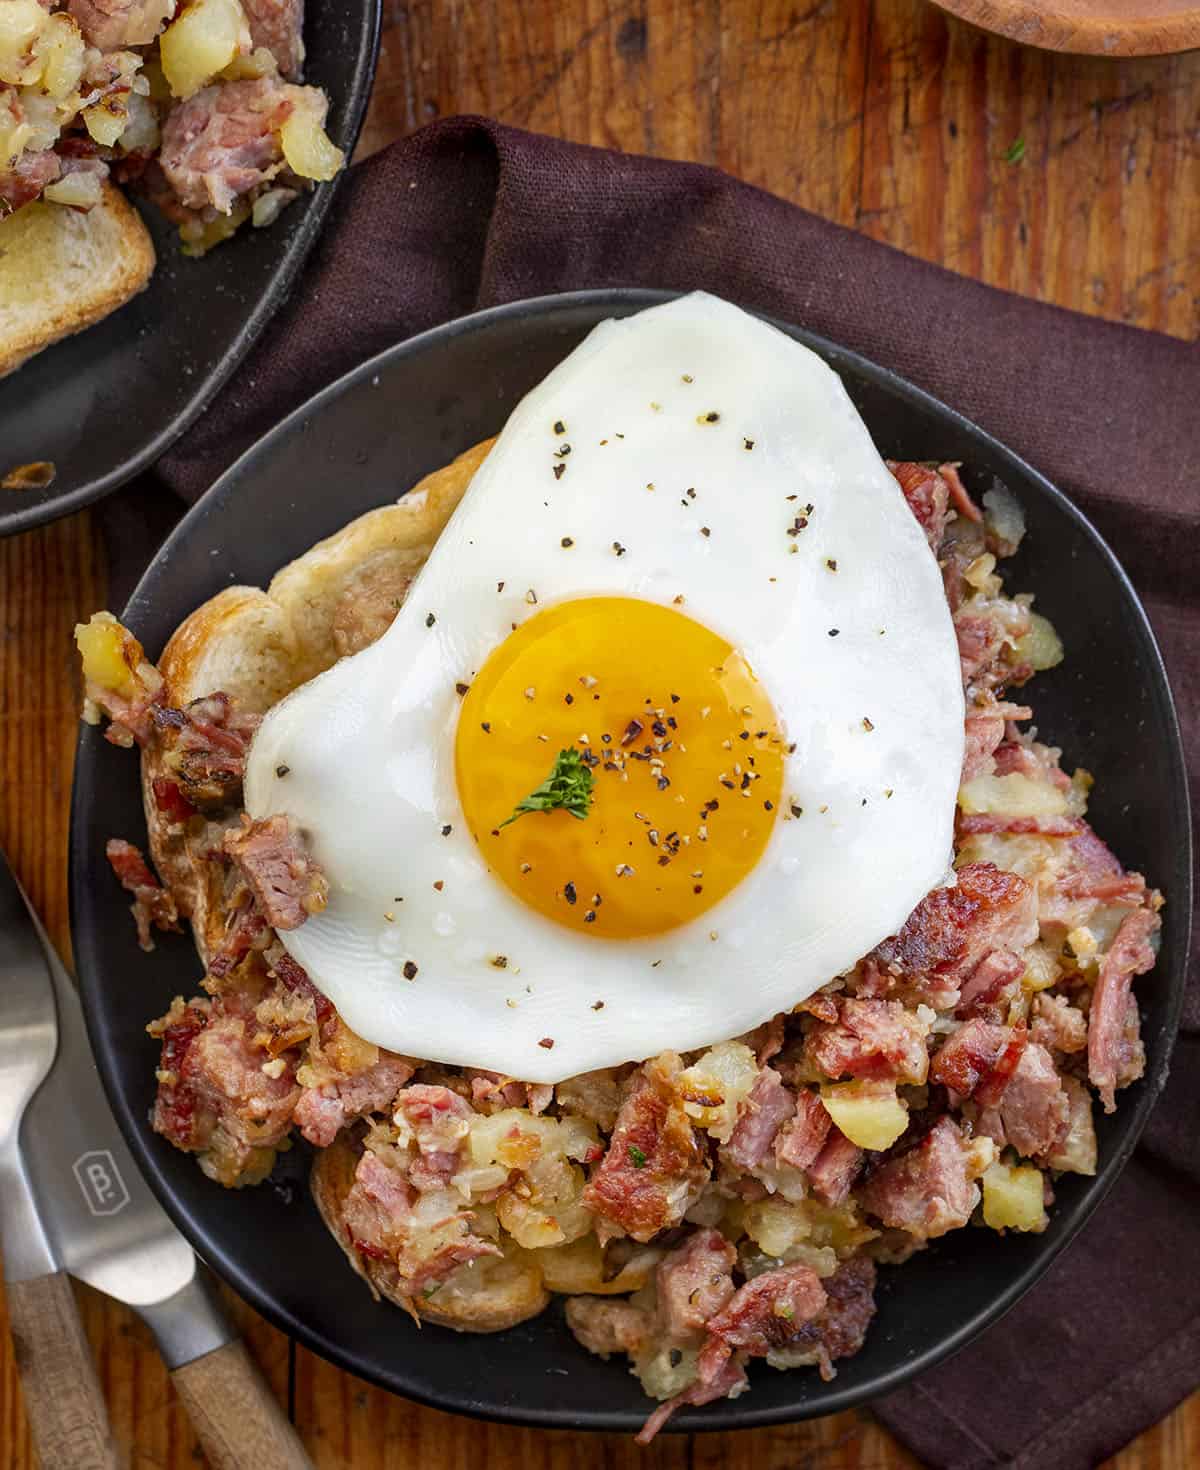 Plate of Corned Beef Hash with Over Medium Egg on Top